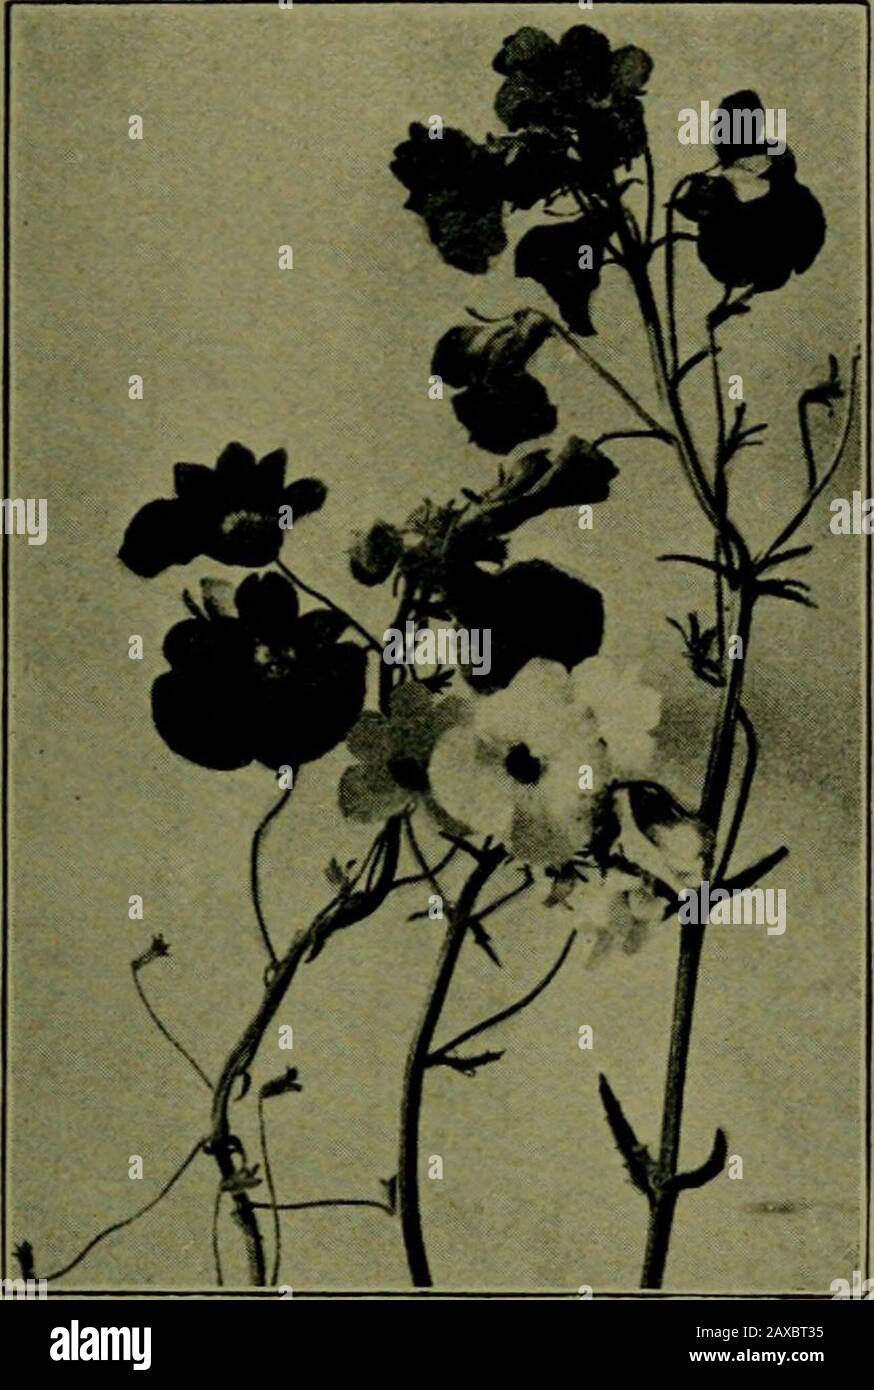 Plants and their ways in South Africa . Fig. 338.—I. Floral diagram of Halleria flower. II. Bilocular ovary ofAntirrhinum. (From Edmonds and Marloths Elementary Botany for SouthAfrica). Diascia.—Corolla 2-lipped, but more regular than inNemesia. Upper lip 2-parted, lower 3-parted. Middle lobeoften notched. As in Nemesia the two longer (front) stamenscurve round and clasp the upper pair. Annuals or persistent herbs, often spreading, with dark wine-colouredor purplish flowers. Eastern and Western. In dry, sandy soil. Forty-seven species in South Africa. CC. Corolla with a single pouch or spur at Stock Photo